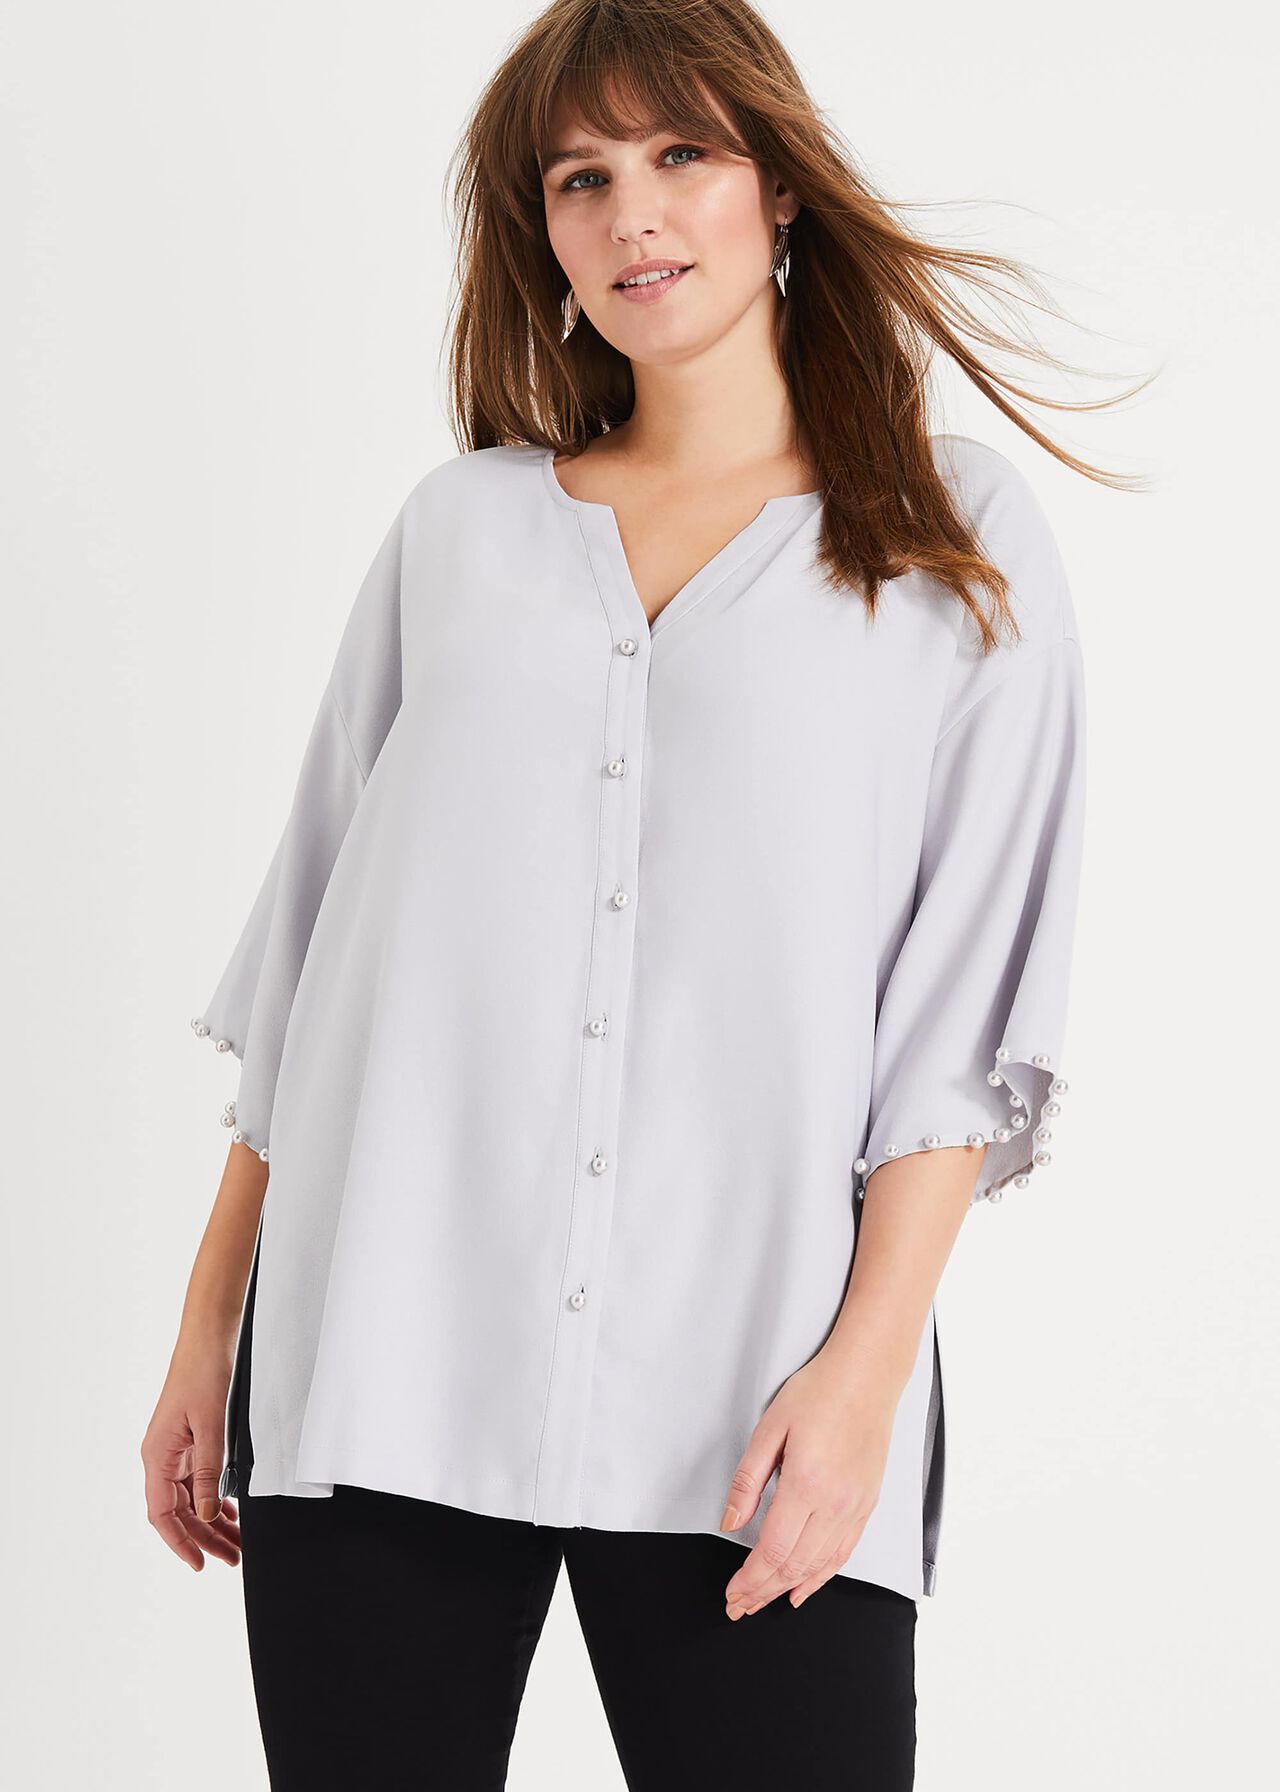 Cassidy Pearl Trim Top